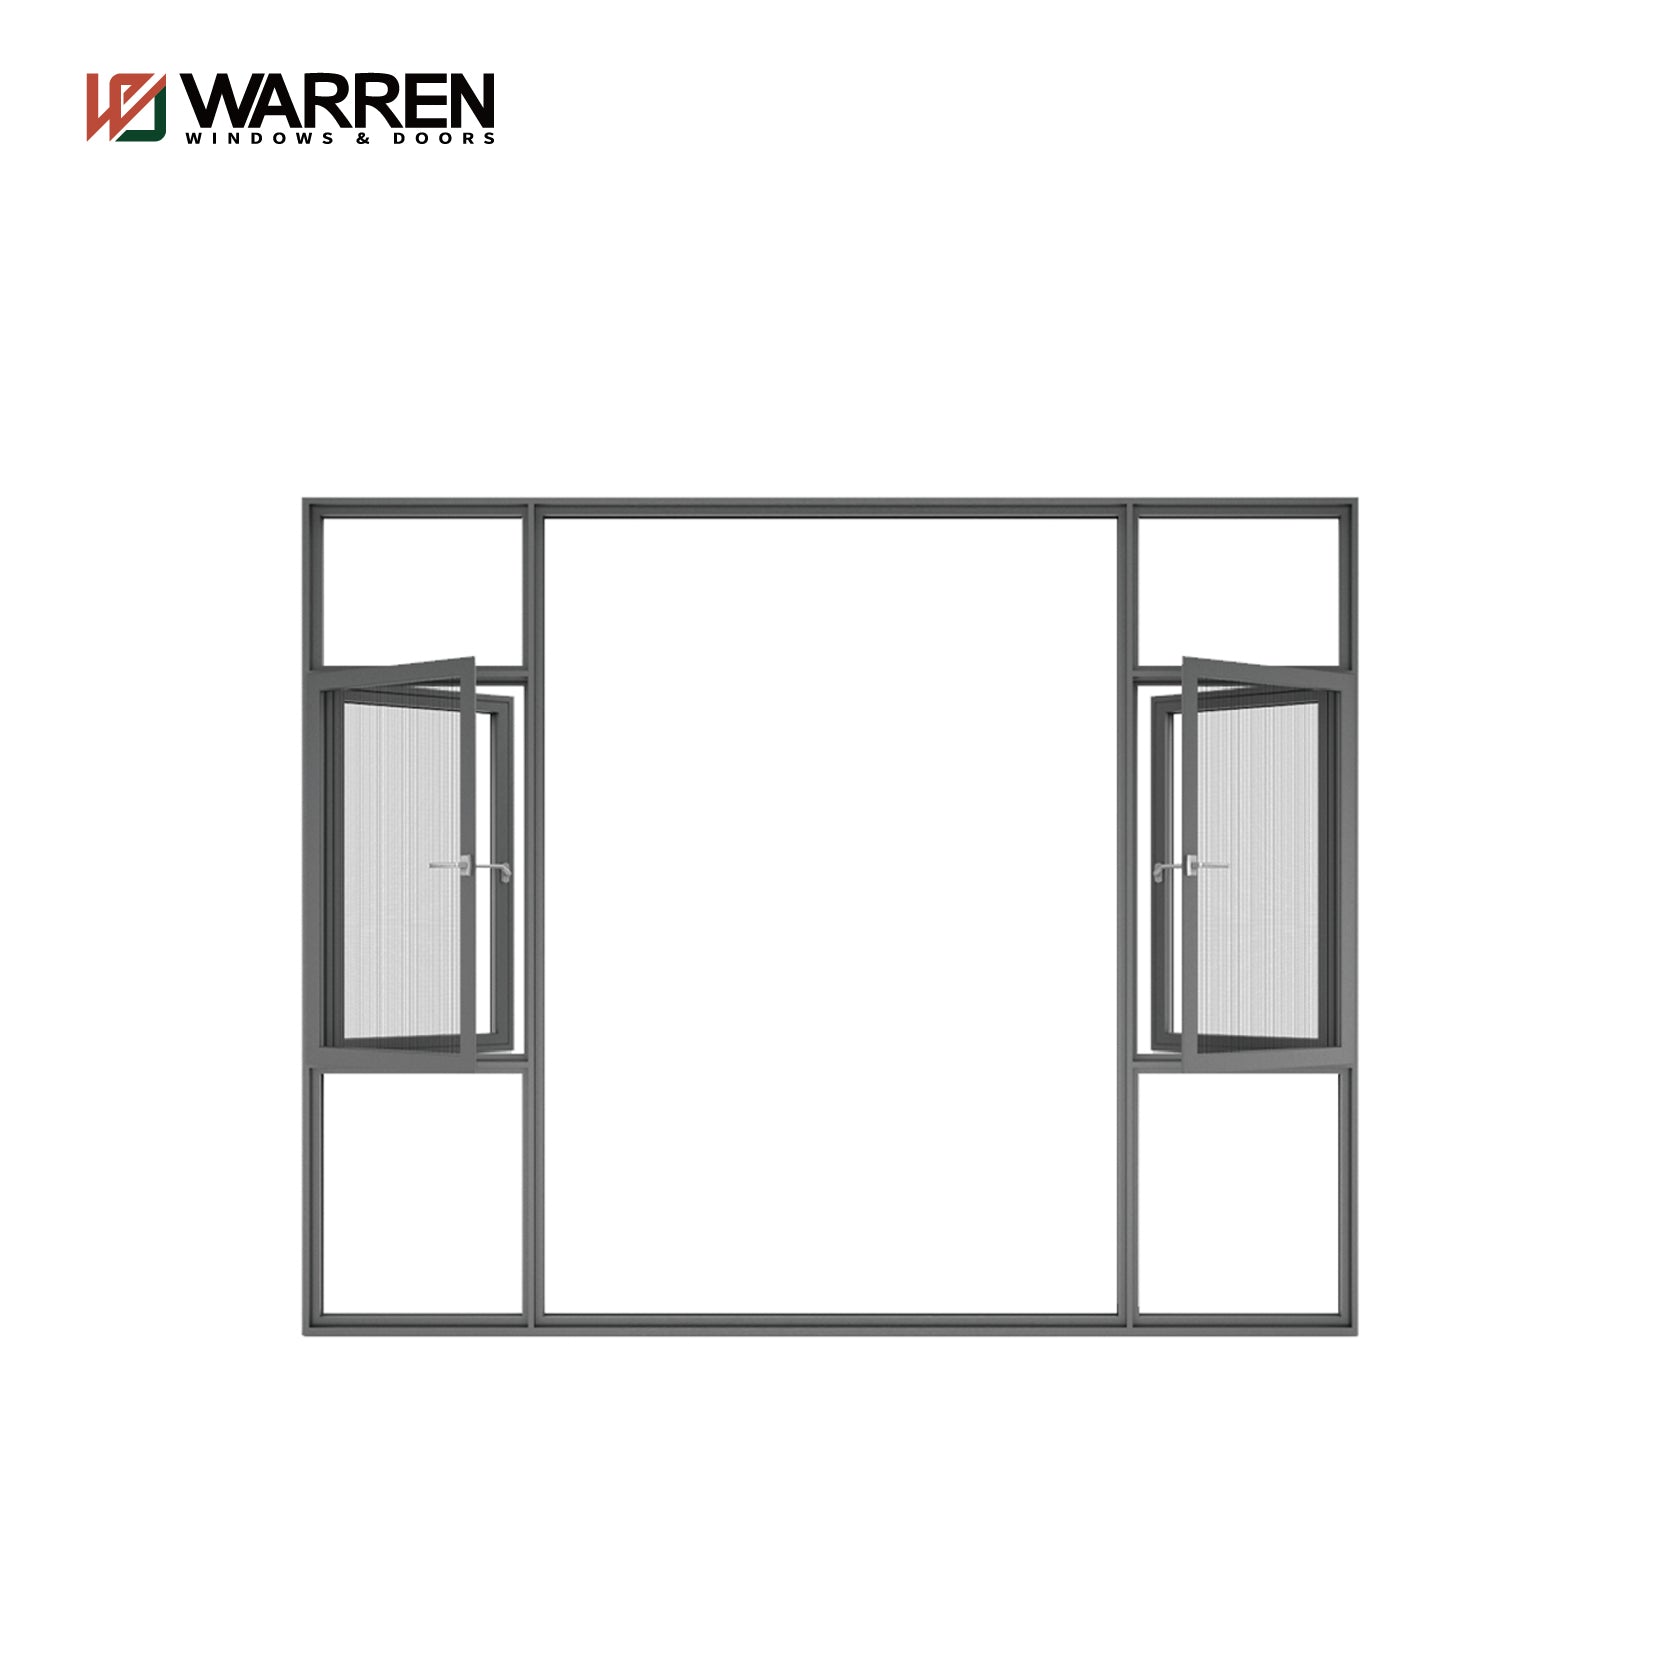 Customized Professional Aluminum Tempered Glass Stylish Screen Windows Casement Window For Home Double Pane